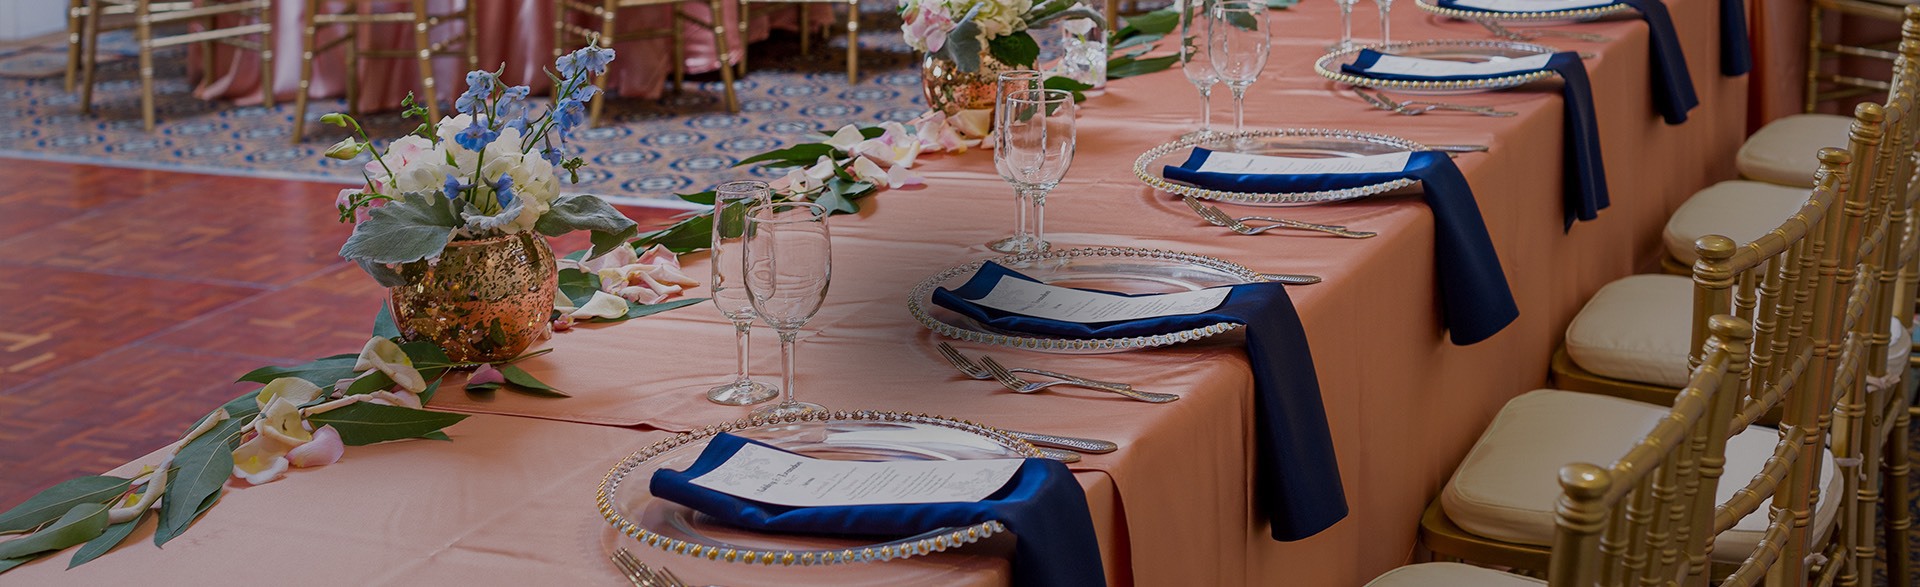 elegant table setup with blue tablecloth and silver napkins